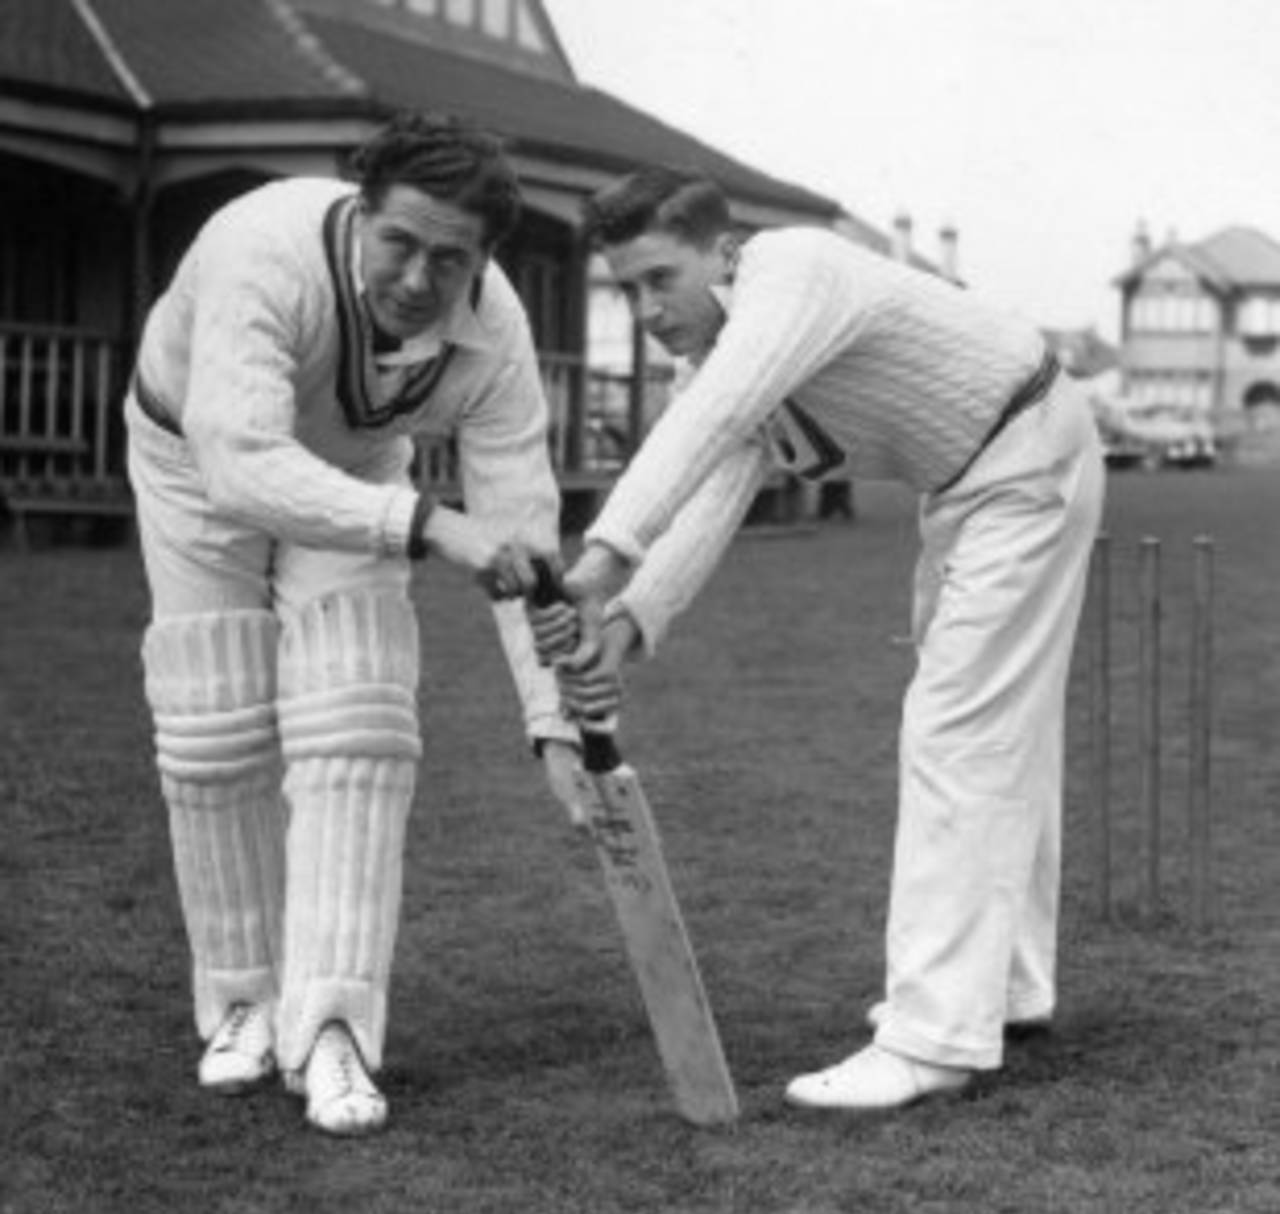 Trevor Bailey in the nets at Chelmsford, April 25, 1956